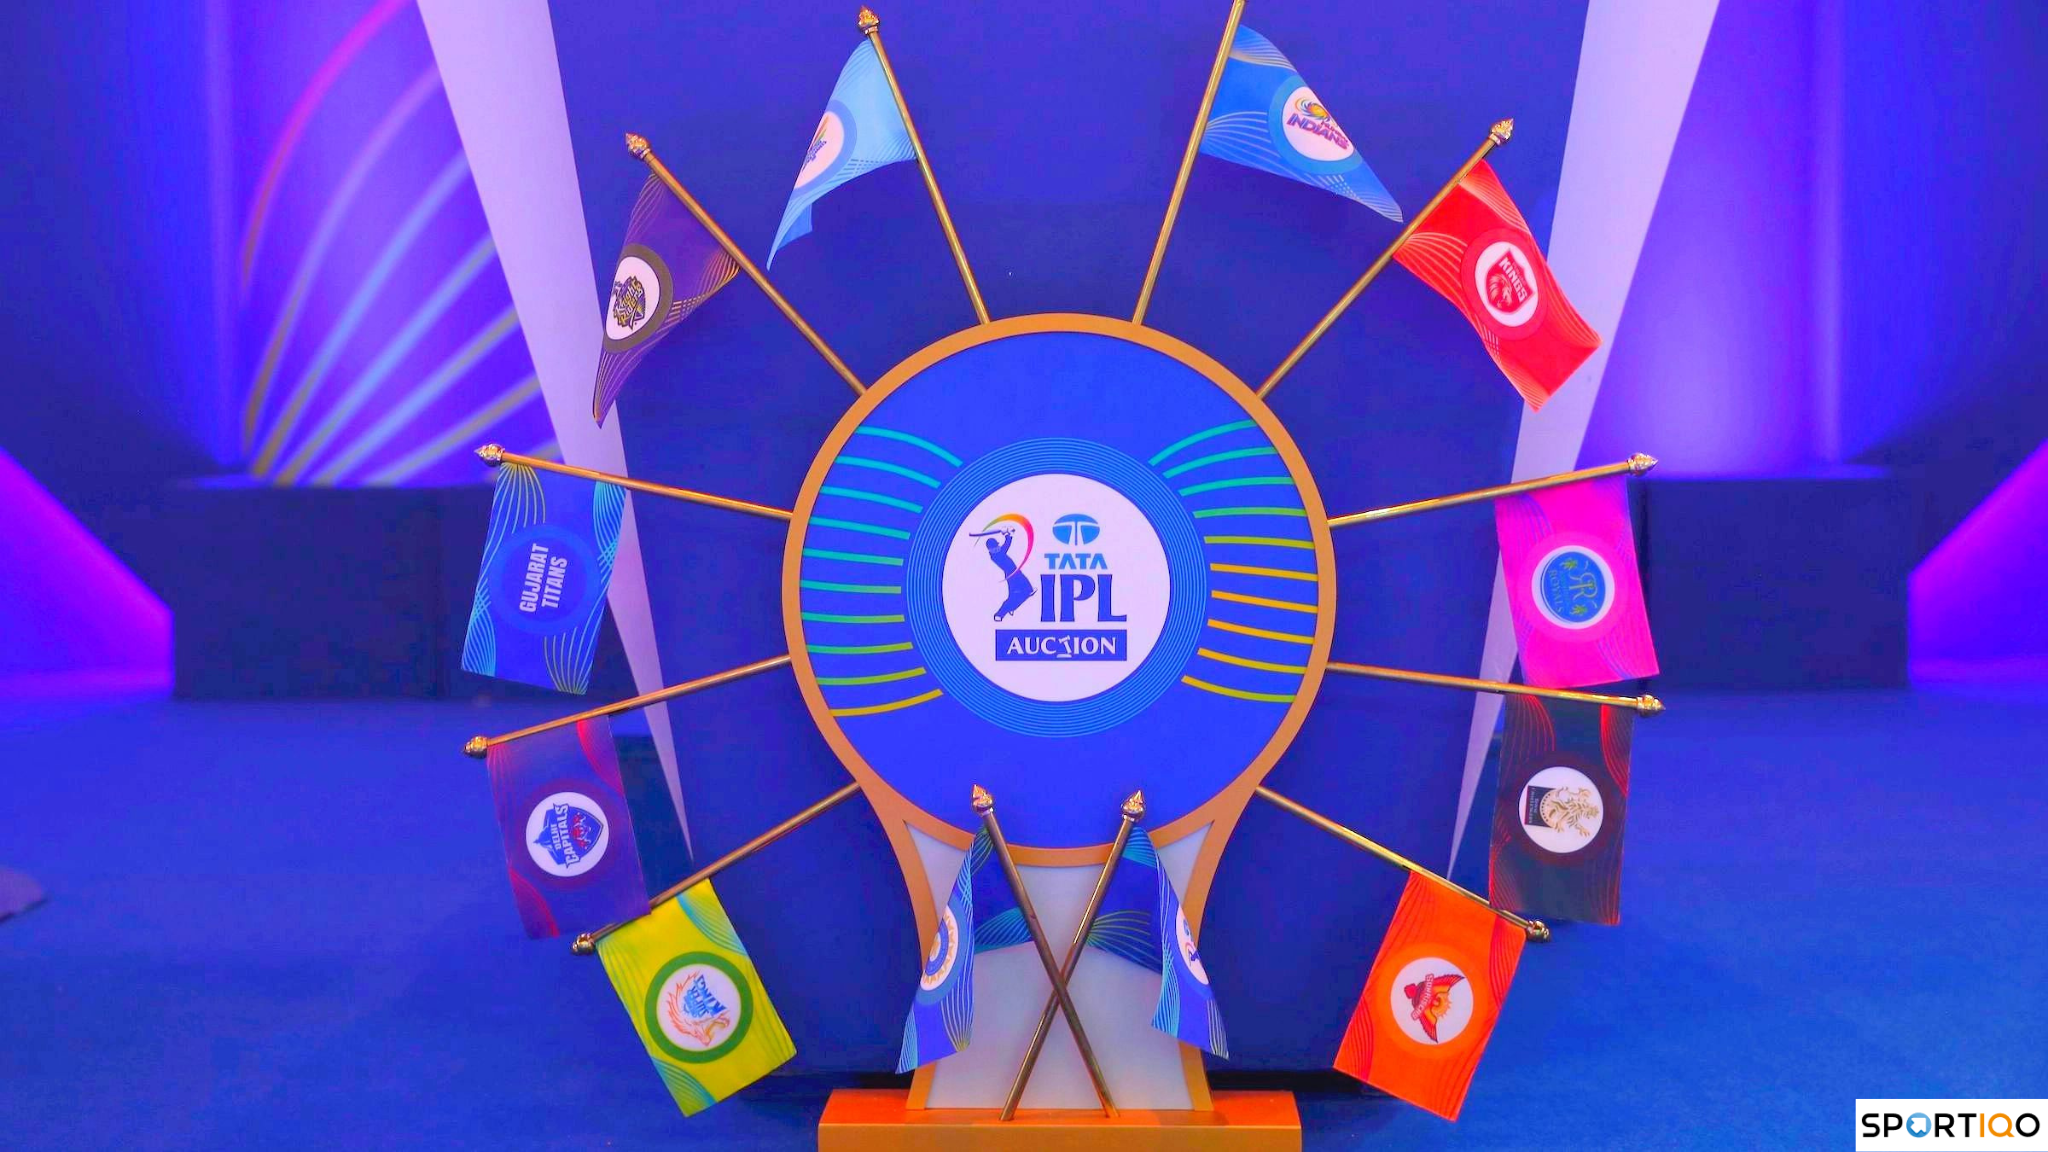 IPL Auction 2024: Overview of the 10 teams' purse size